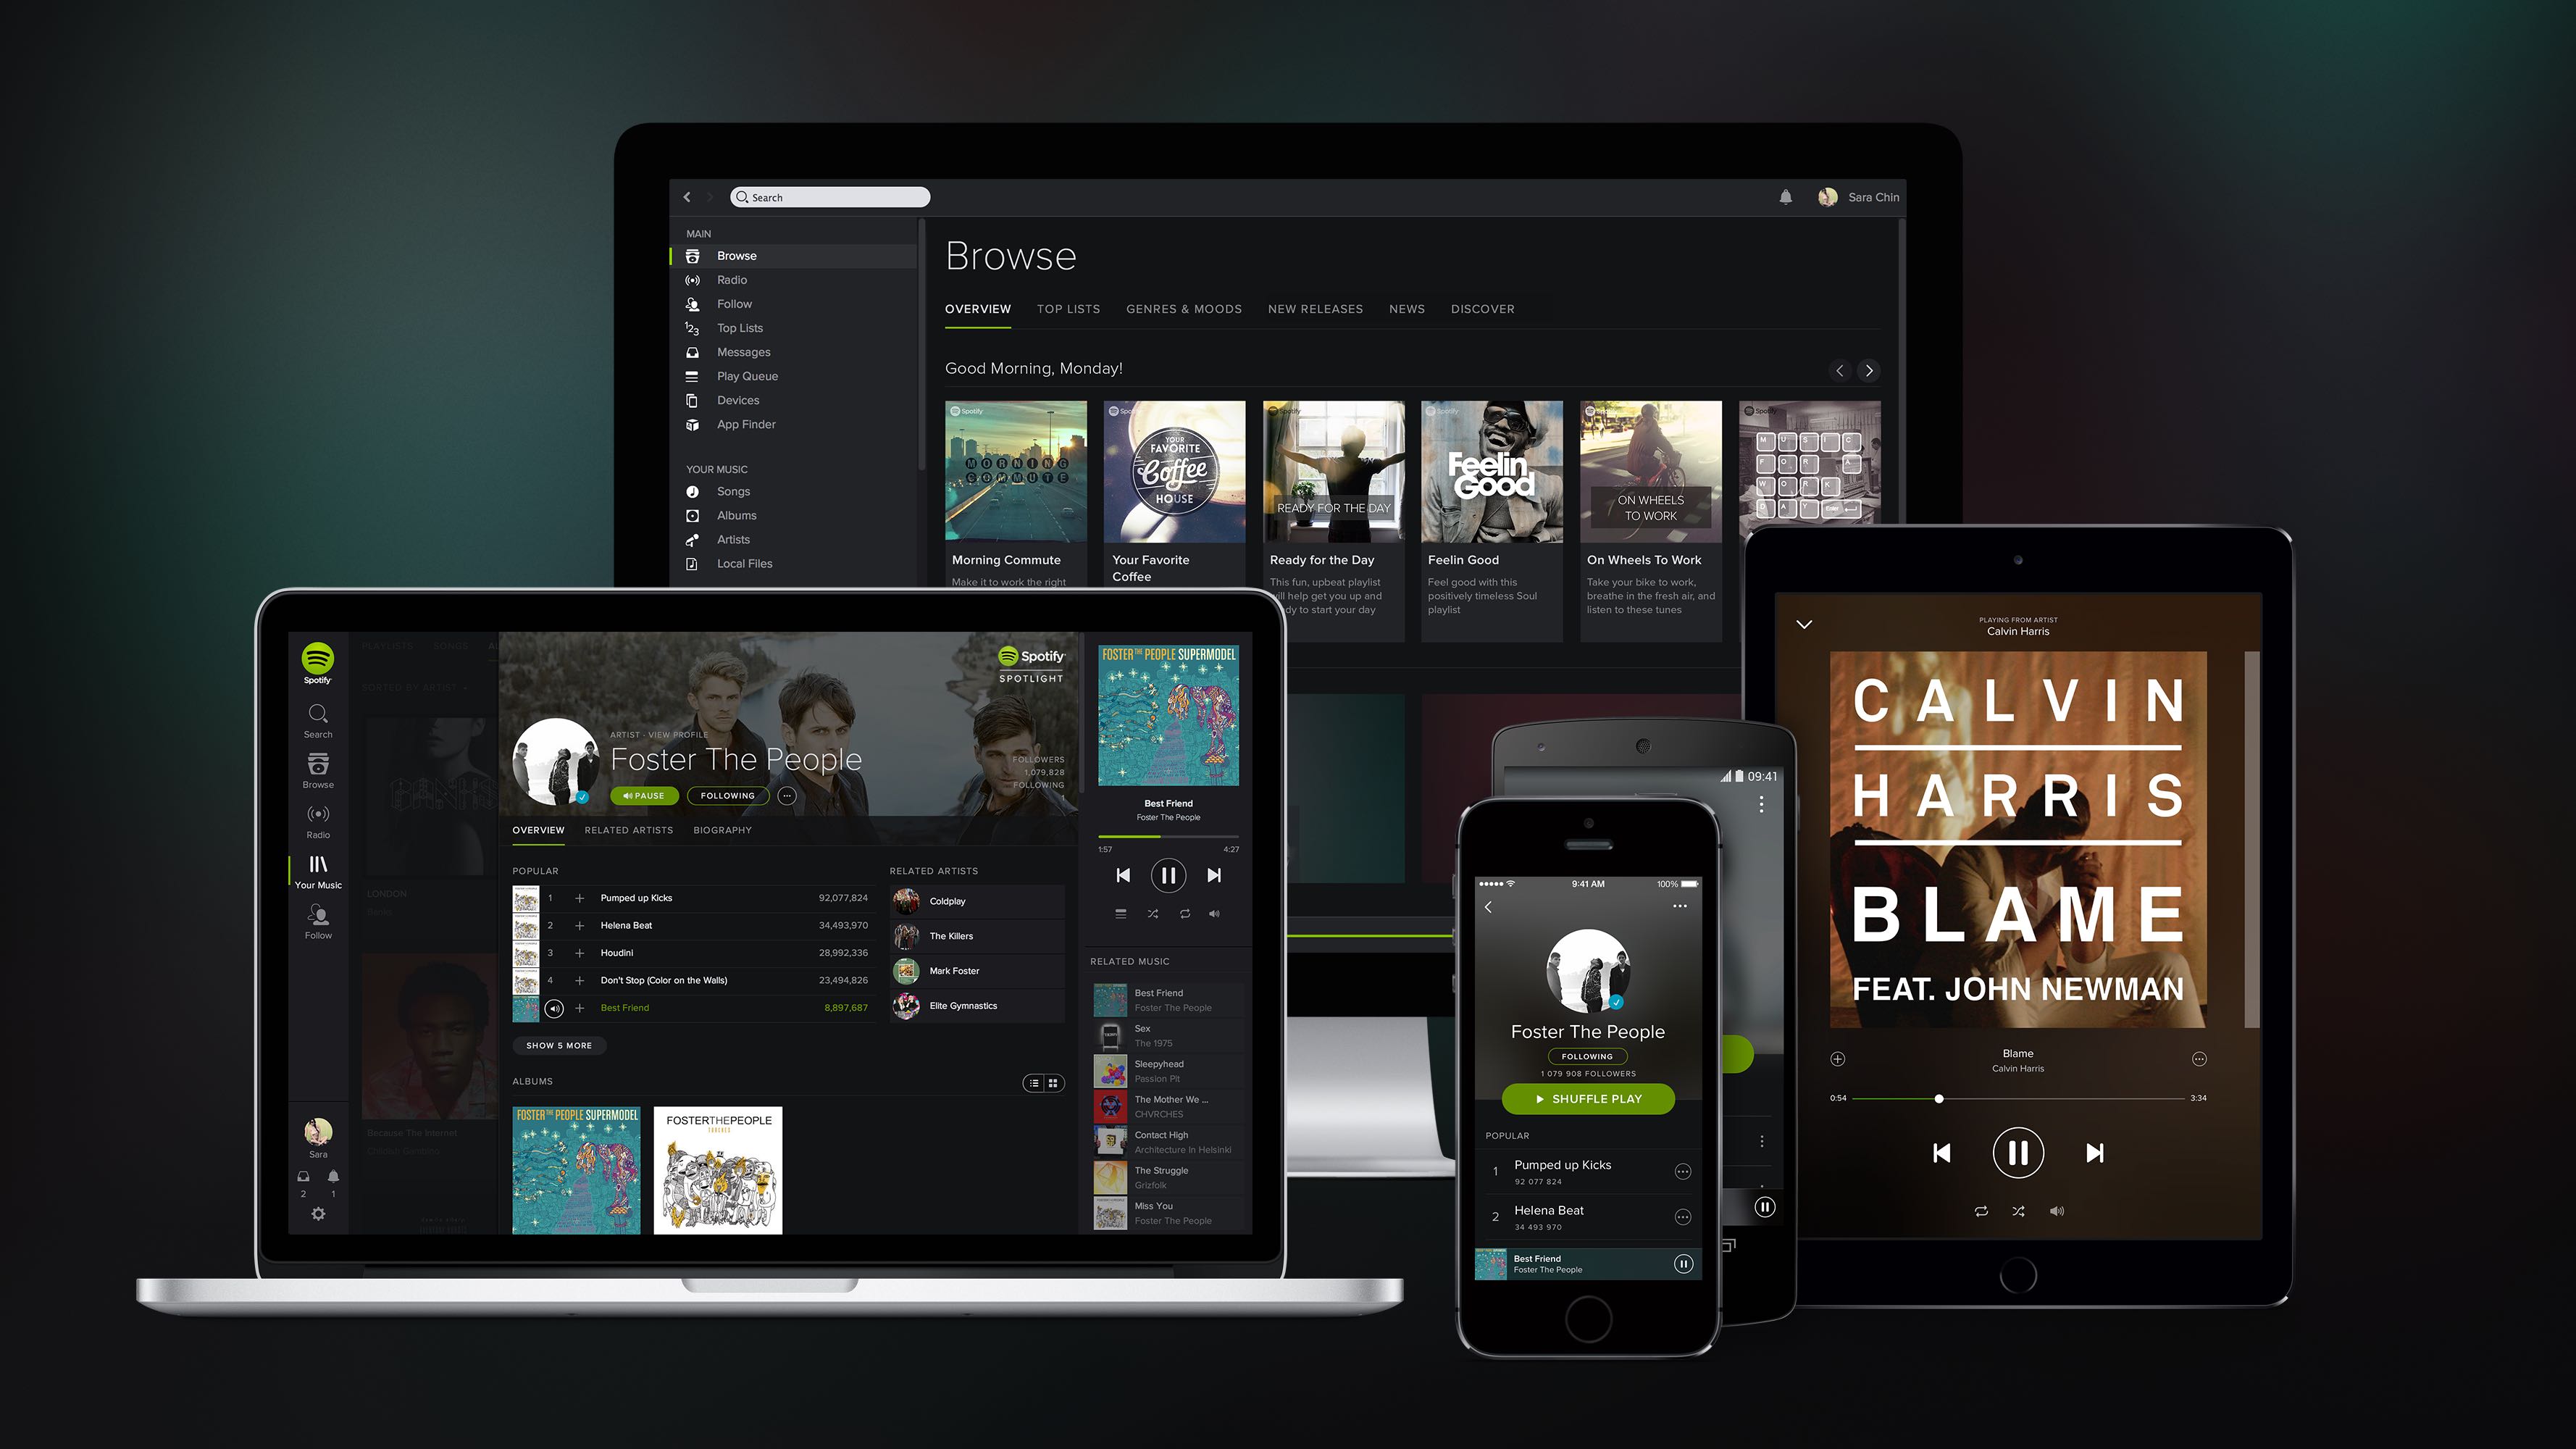 Spotify Premium Features On App